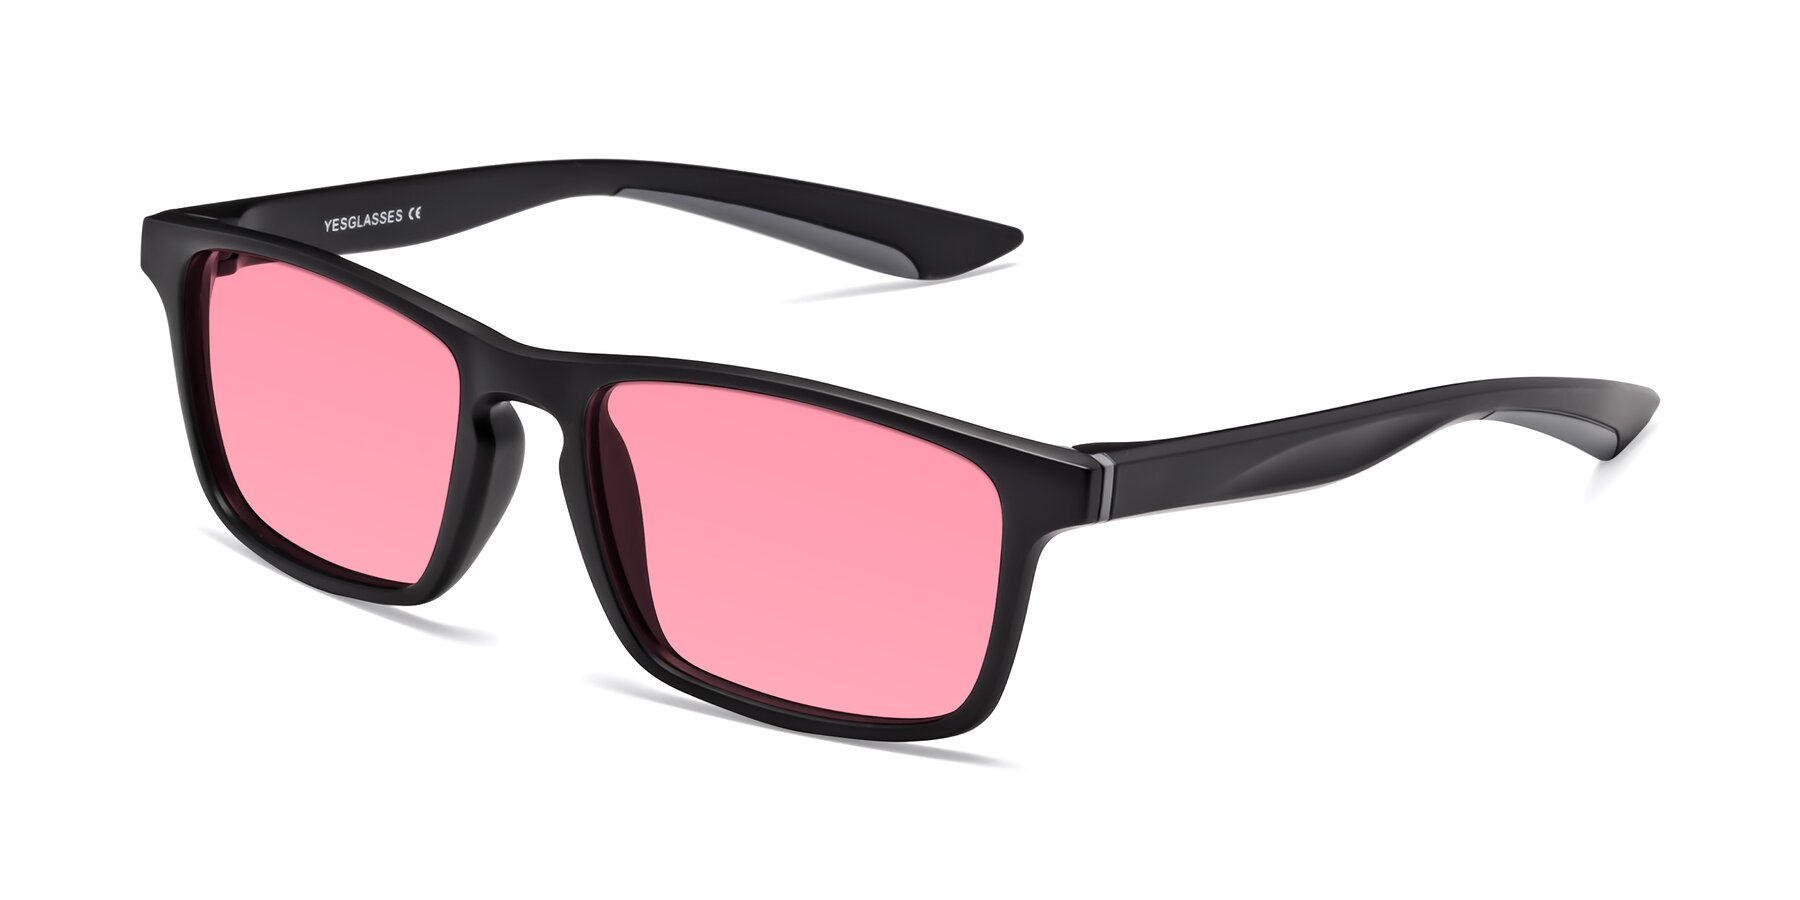 Angle of Passion in Matte Black-Gray with Pink Tinted Lenses